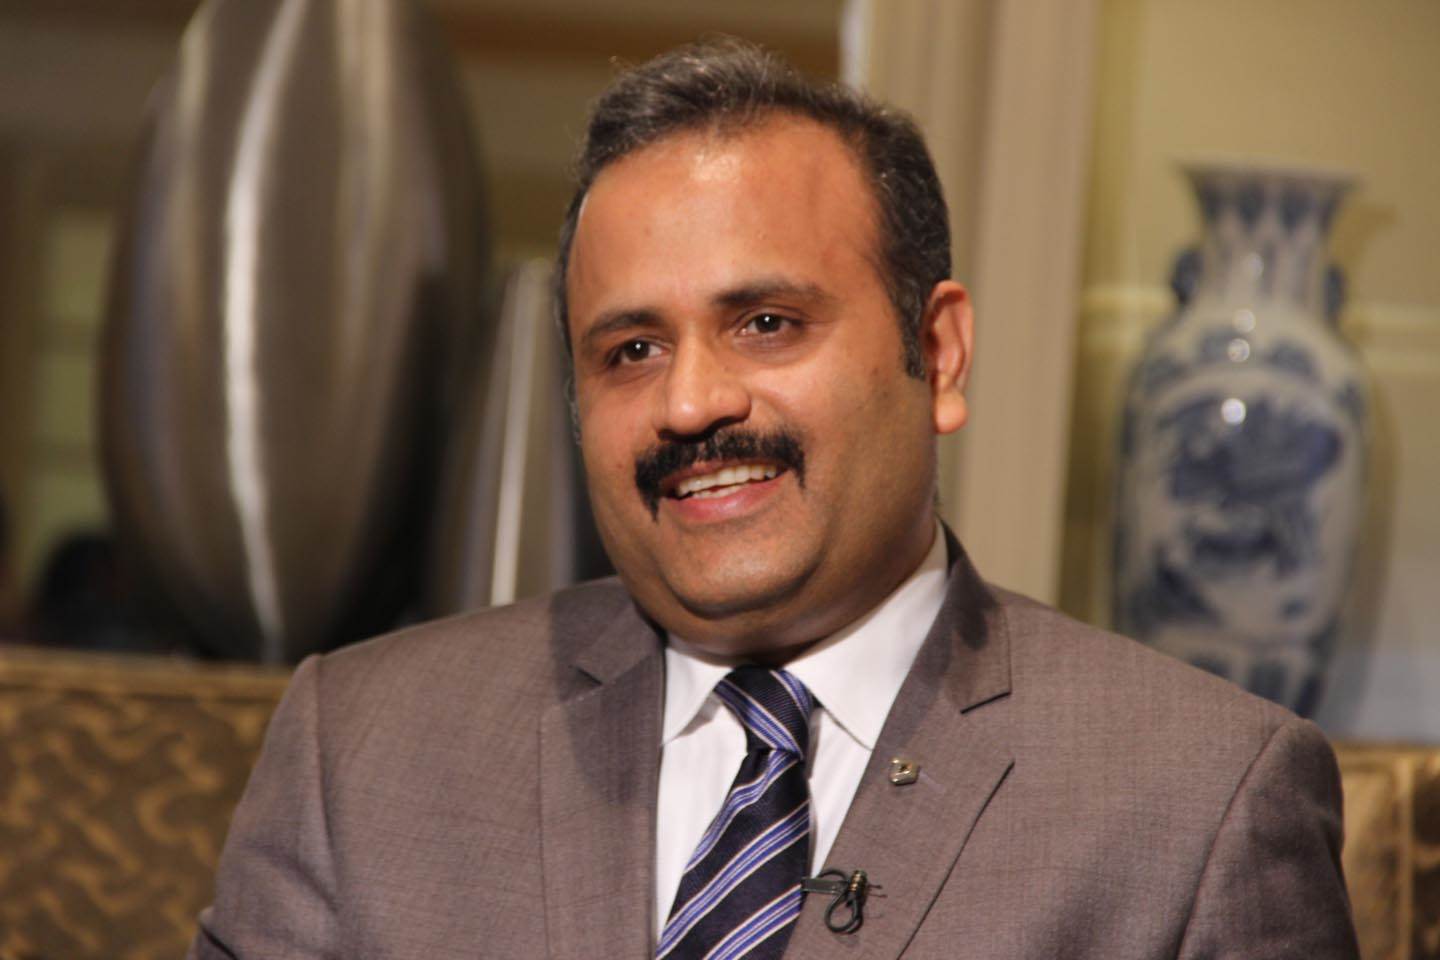 sumit-sawhney-country-ceo-and-managing-director-renault-india-operations